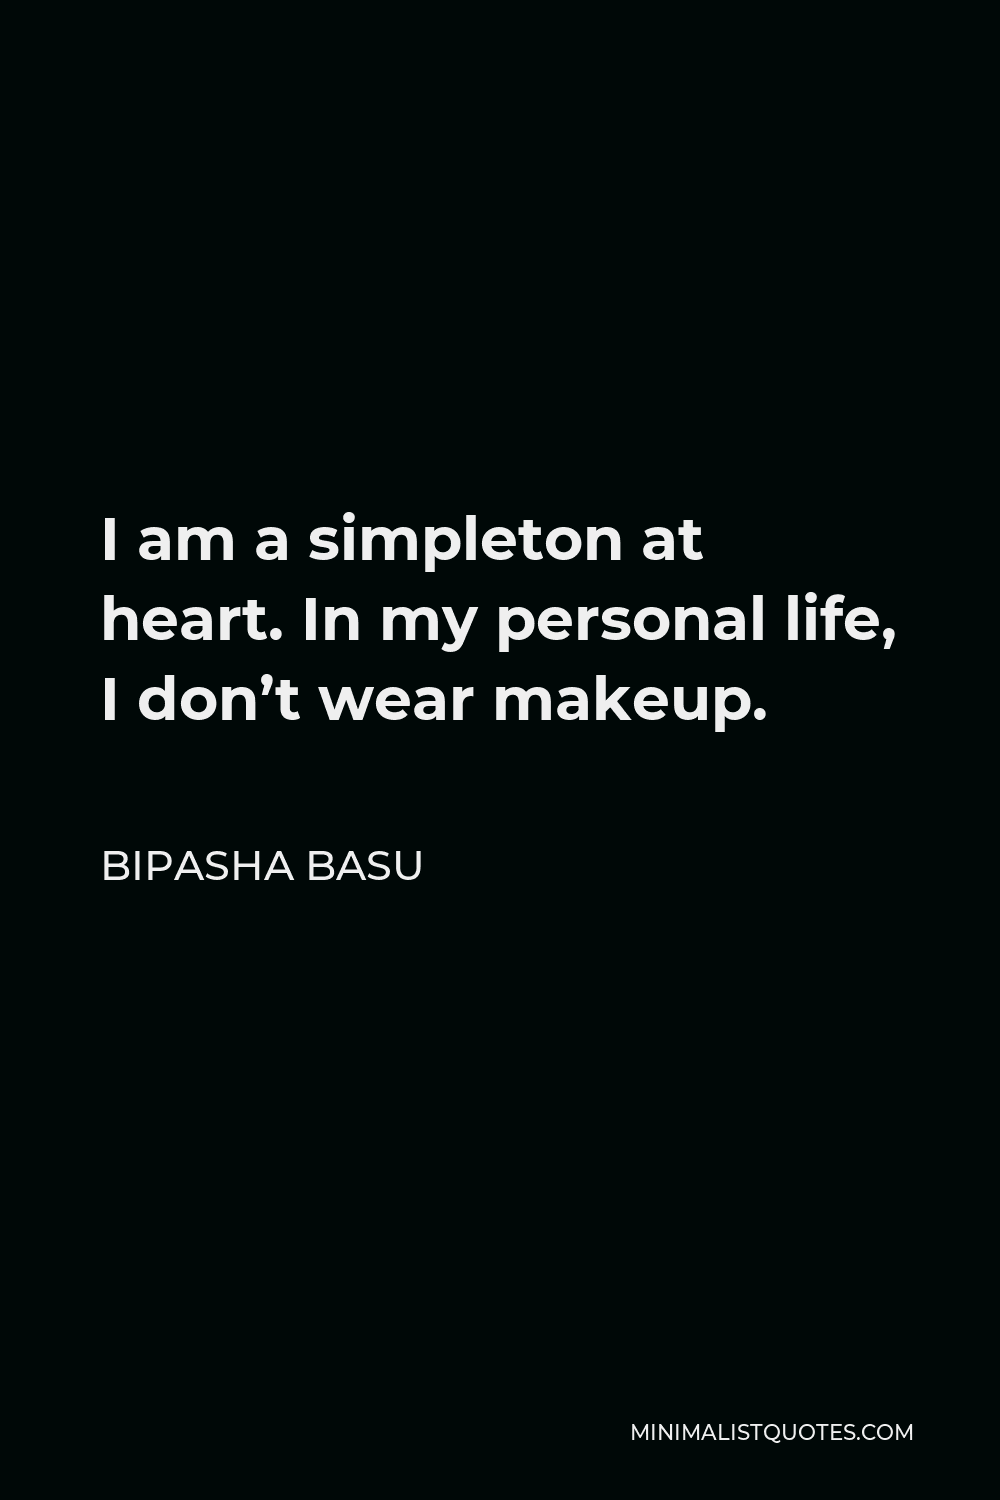 Bipasha Basu Quote - I am a simpleton at heart. In my personal life, I don’t wear makeup.